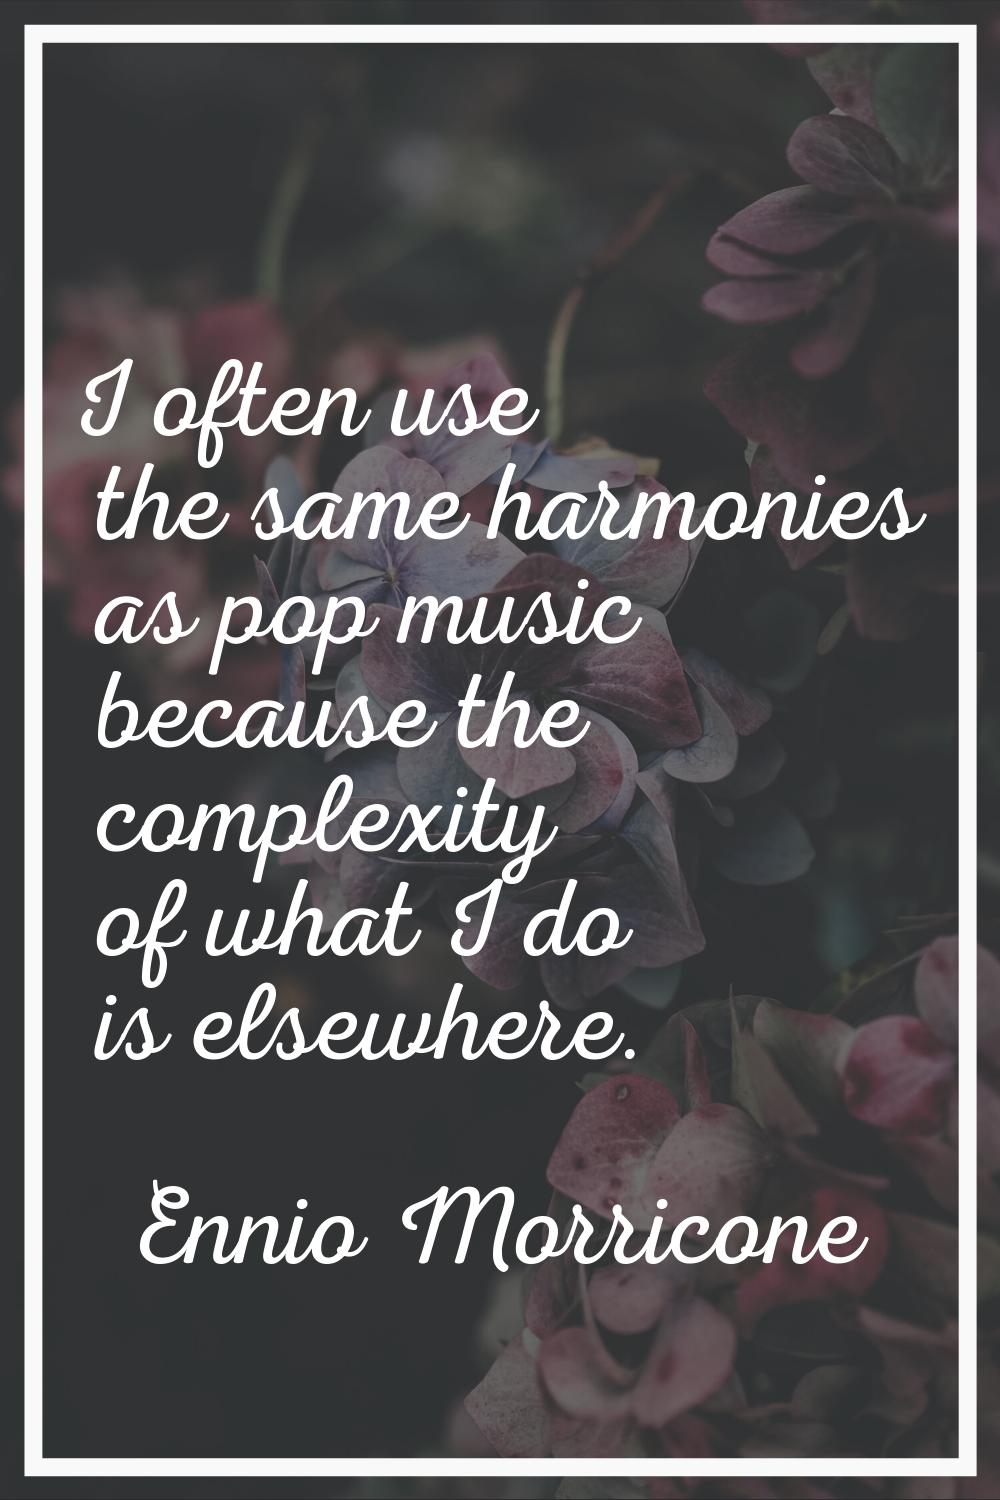 I often use the same harmonies as pop music because the complexity of what I do is elsewhere.